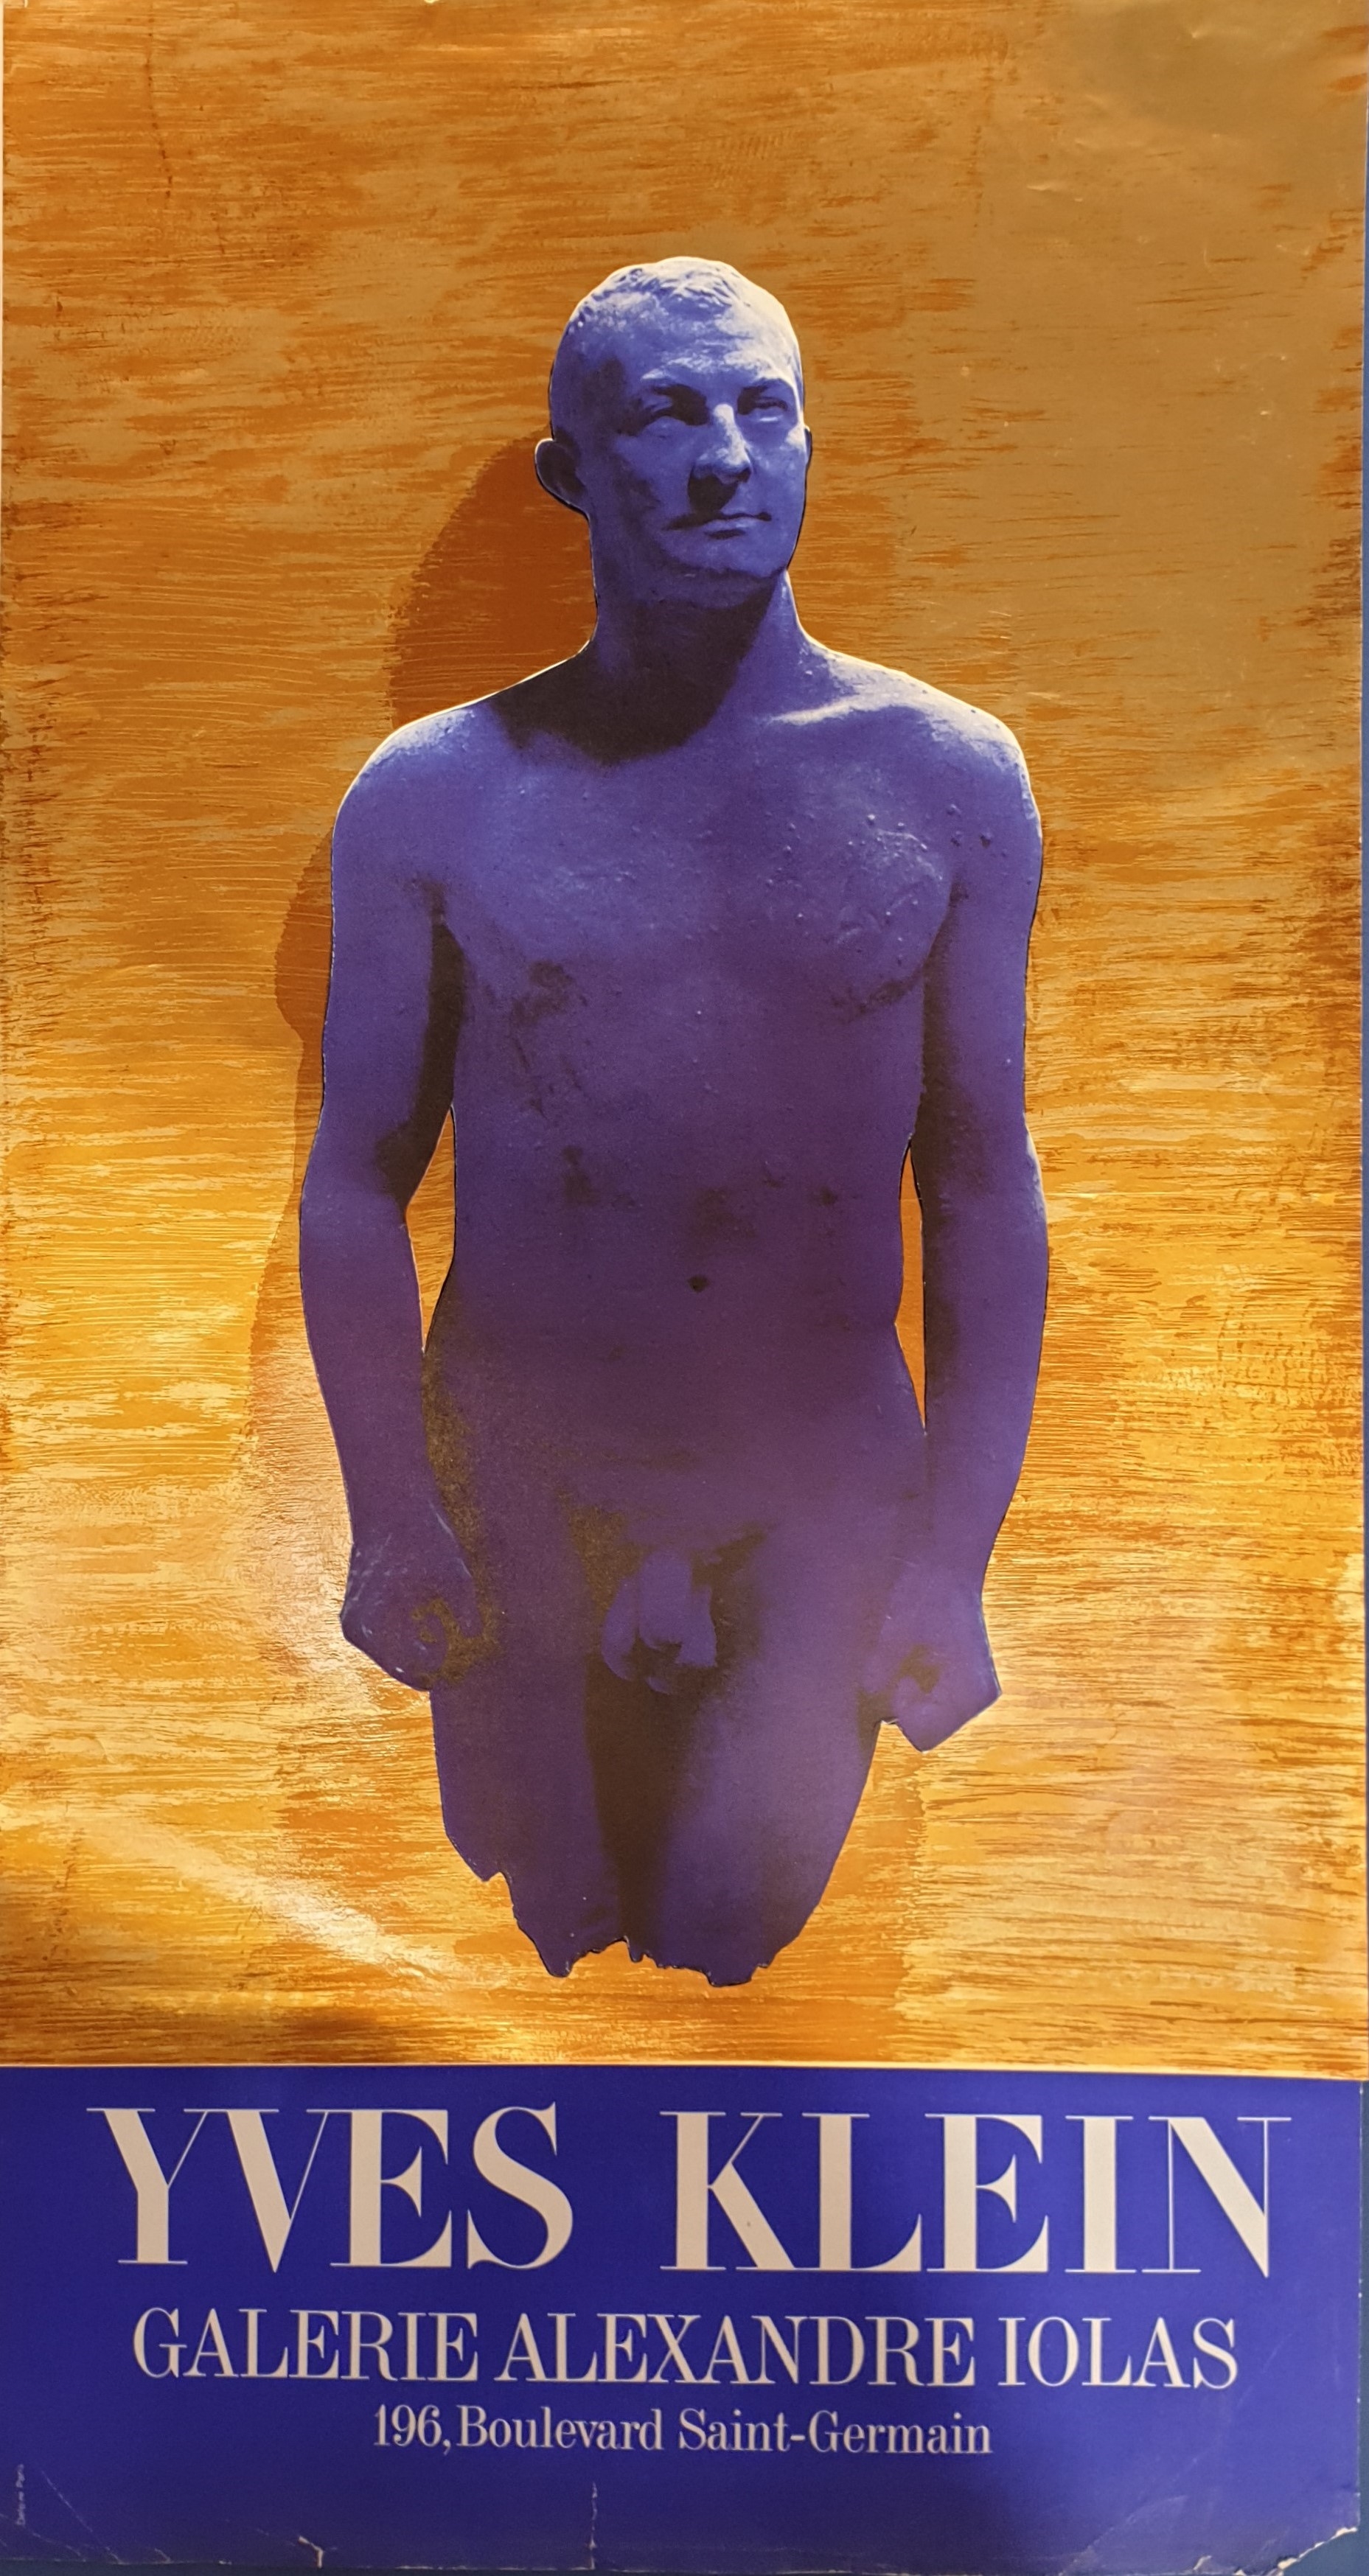 Untitled by Yves Klein